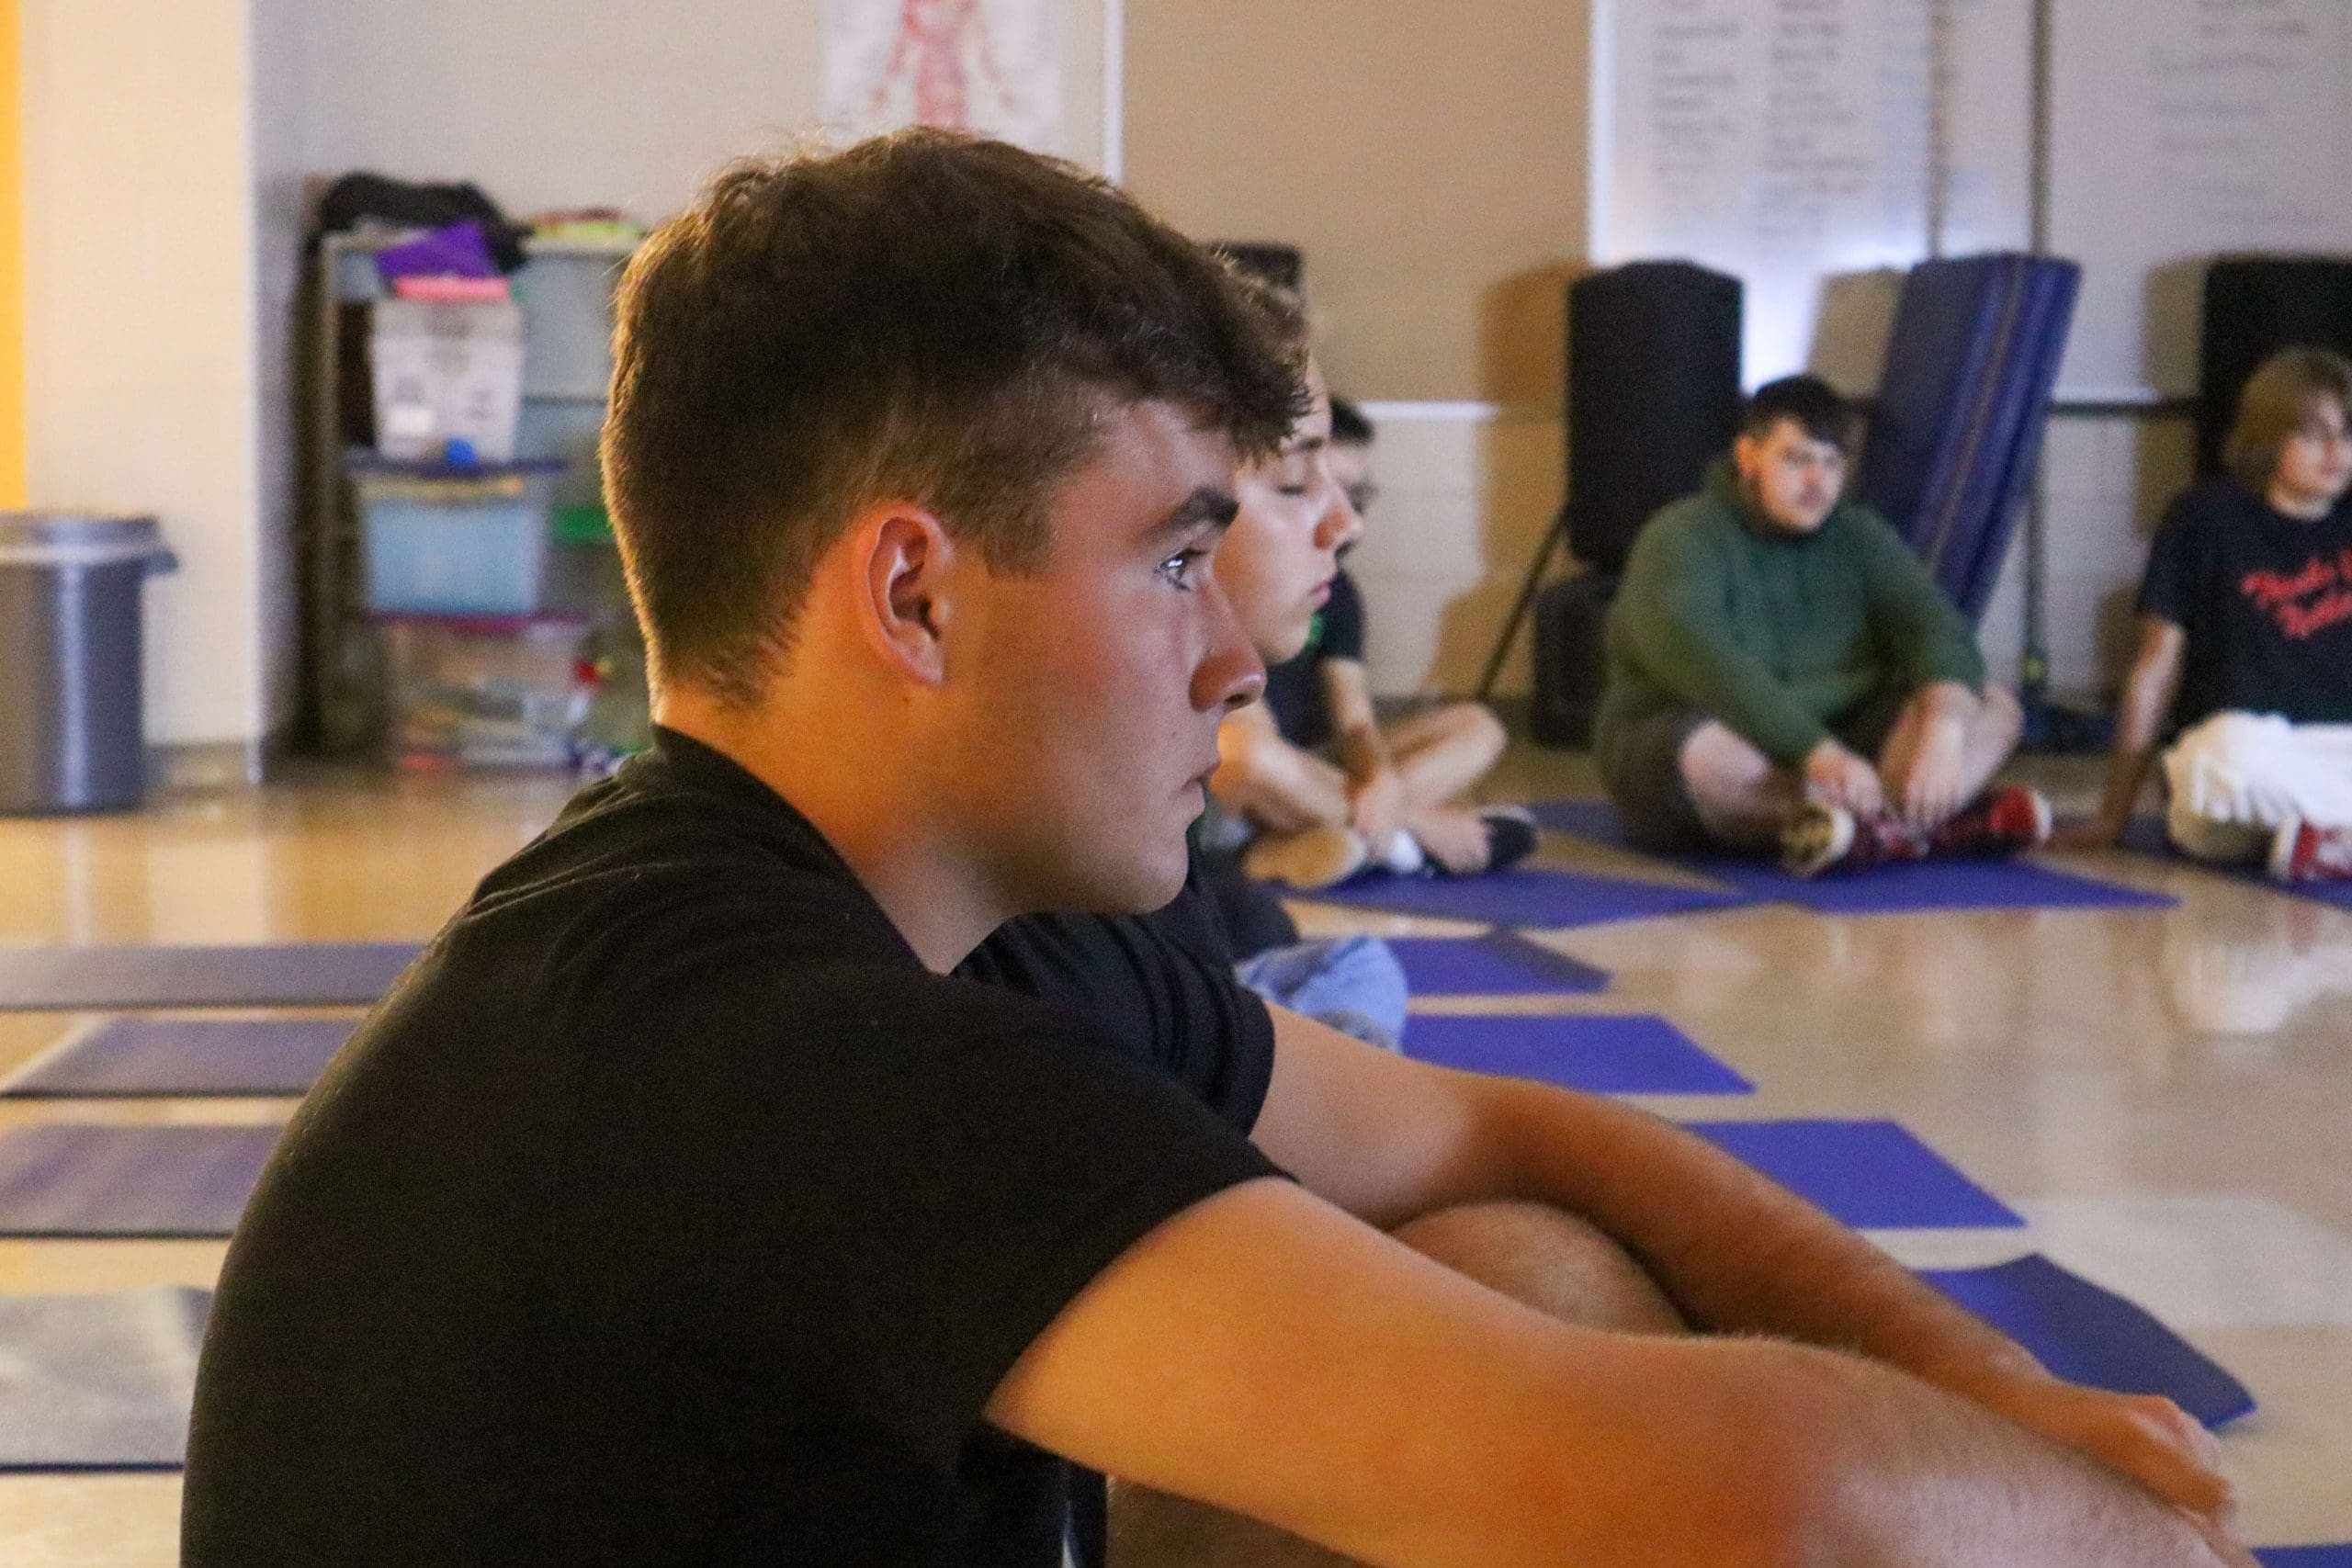 A student watches a PLT4M mindfulness lesson during physical education class.